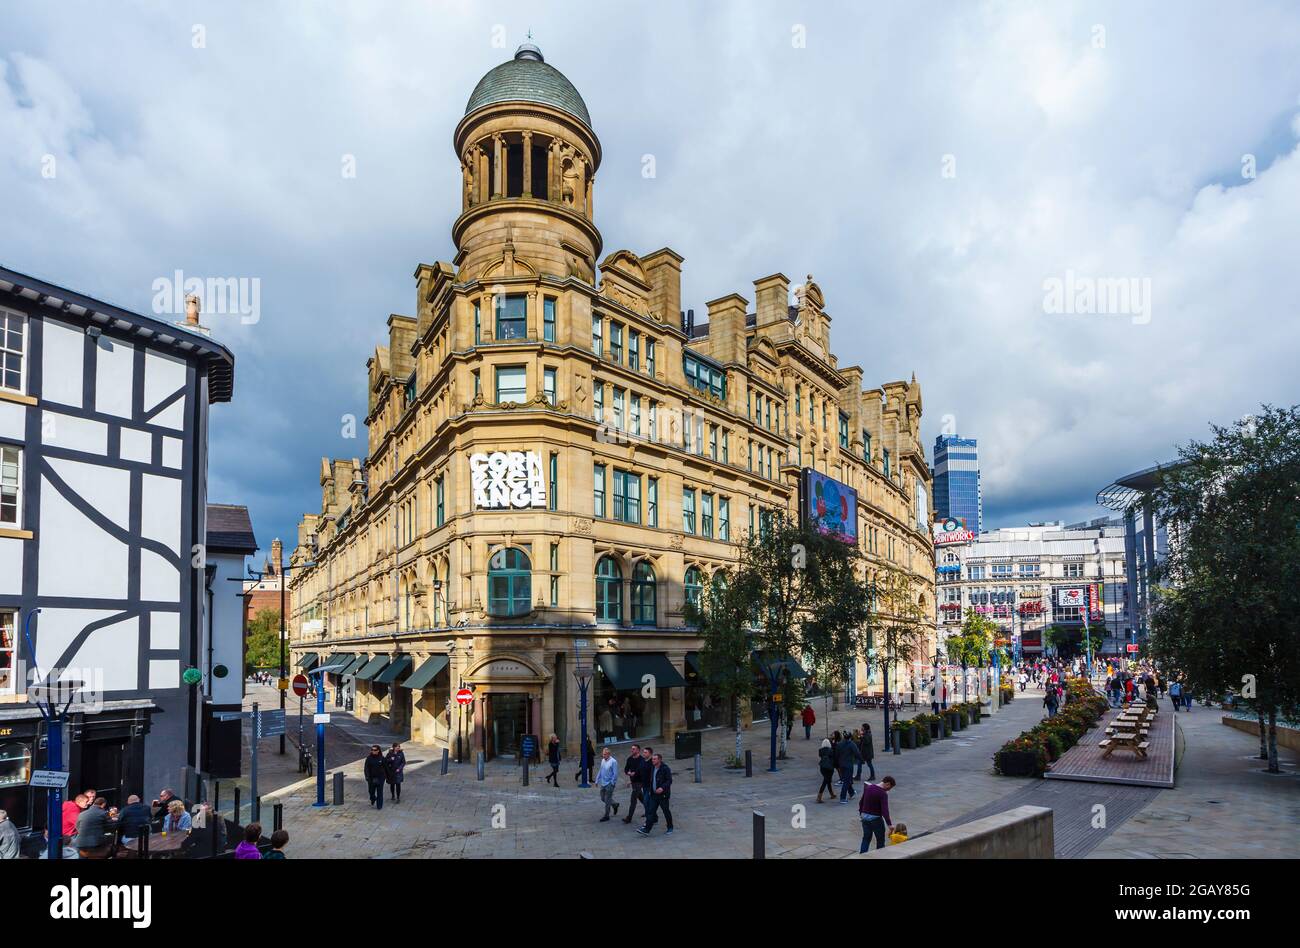 The Corn Exchange, a historic Grade II listed building in Exchange Square, Manchester, north-west England, UK Stock Photo